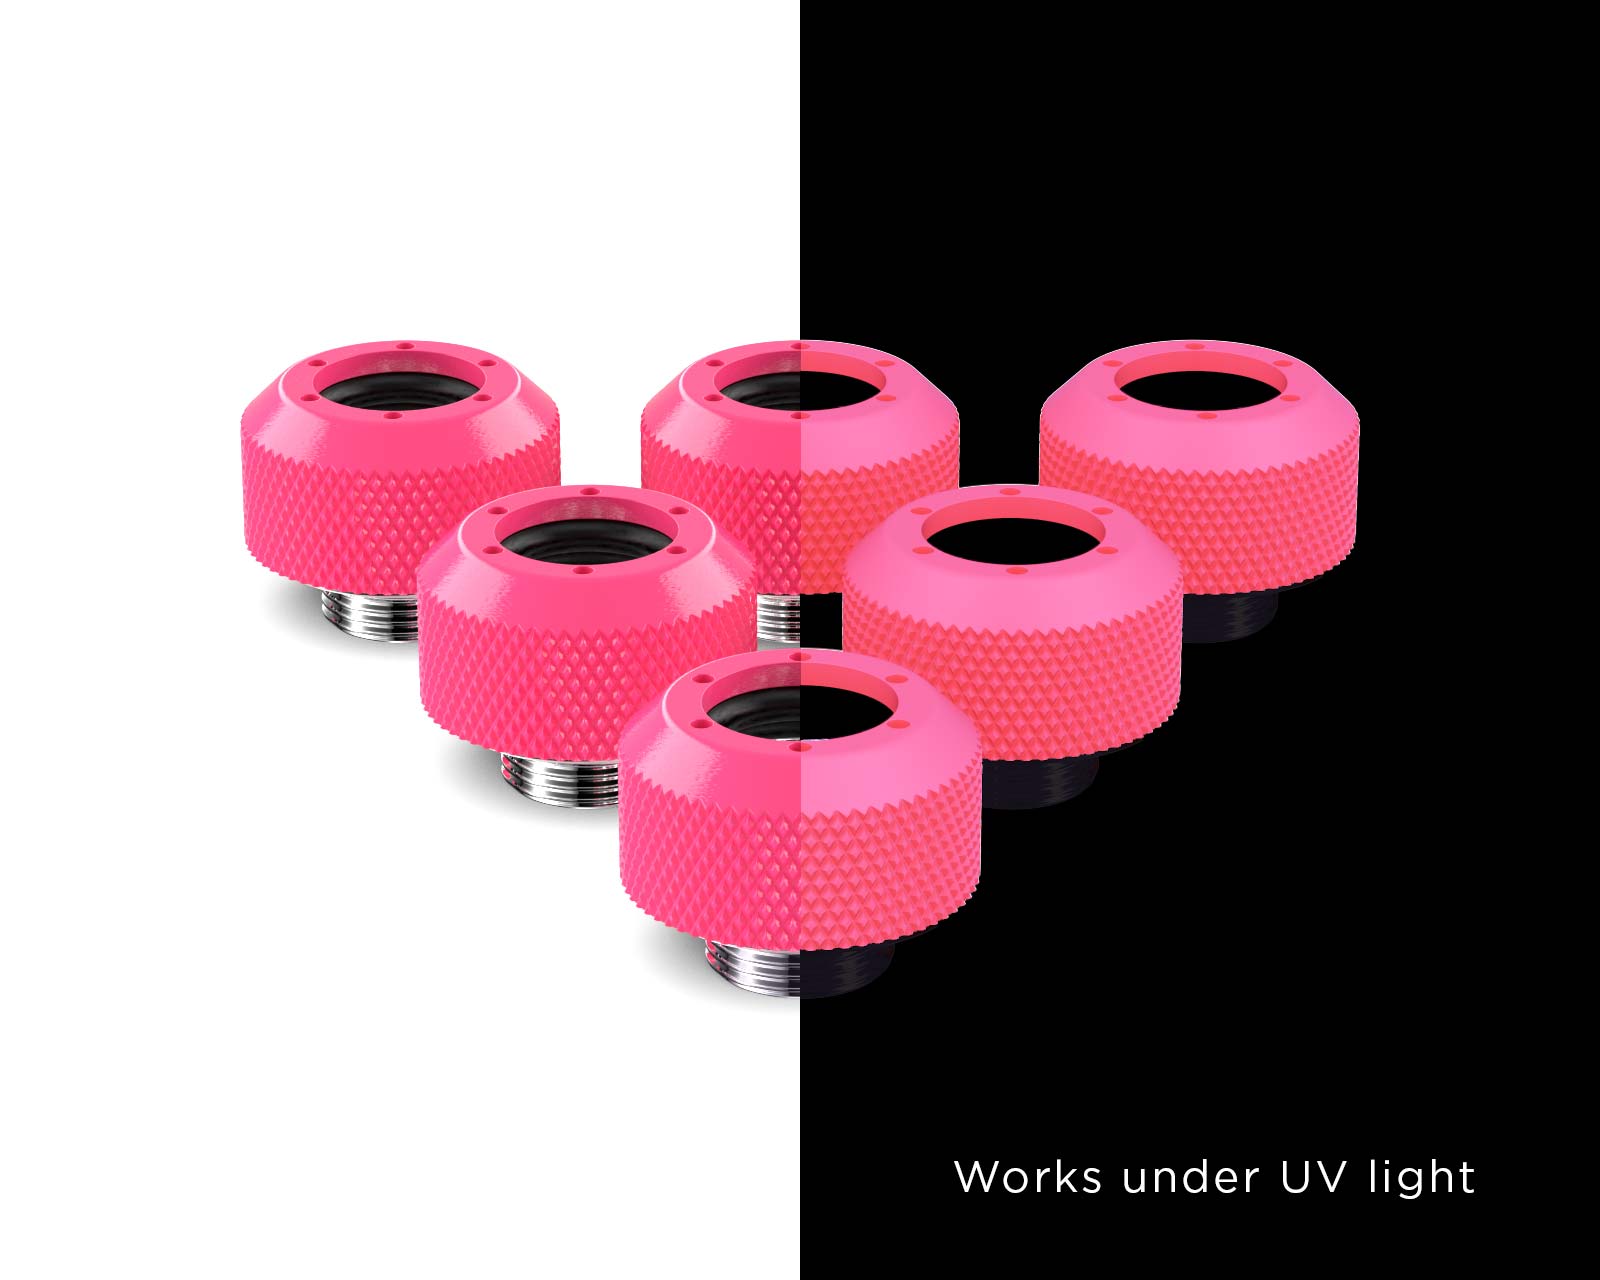 PrimoChill 1/2in. Rigid RevolverSX Series Fitting - 6 pack - PrimoChill - KEEPING IT COOL UV Pink